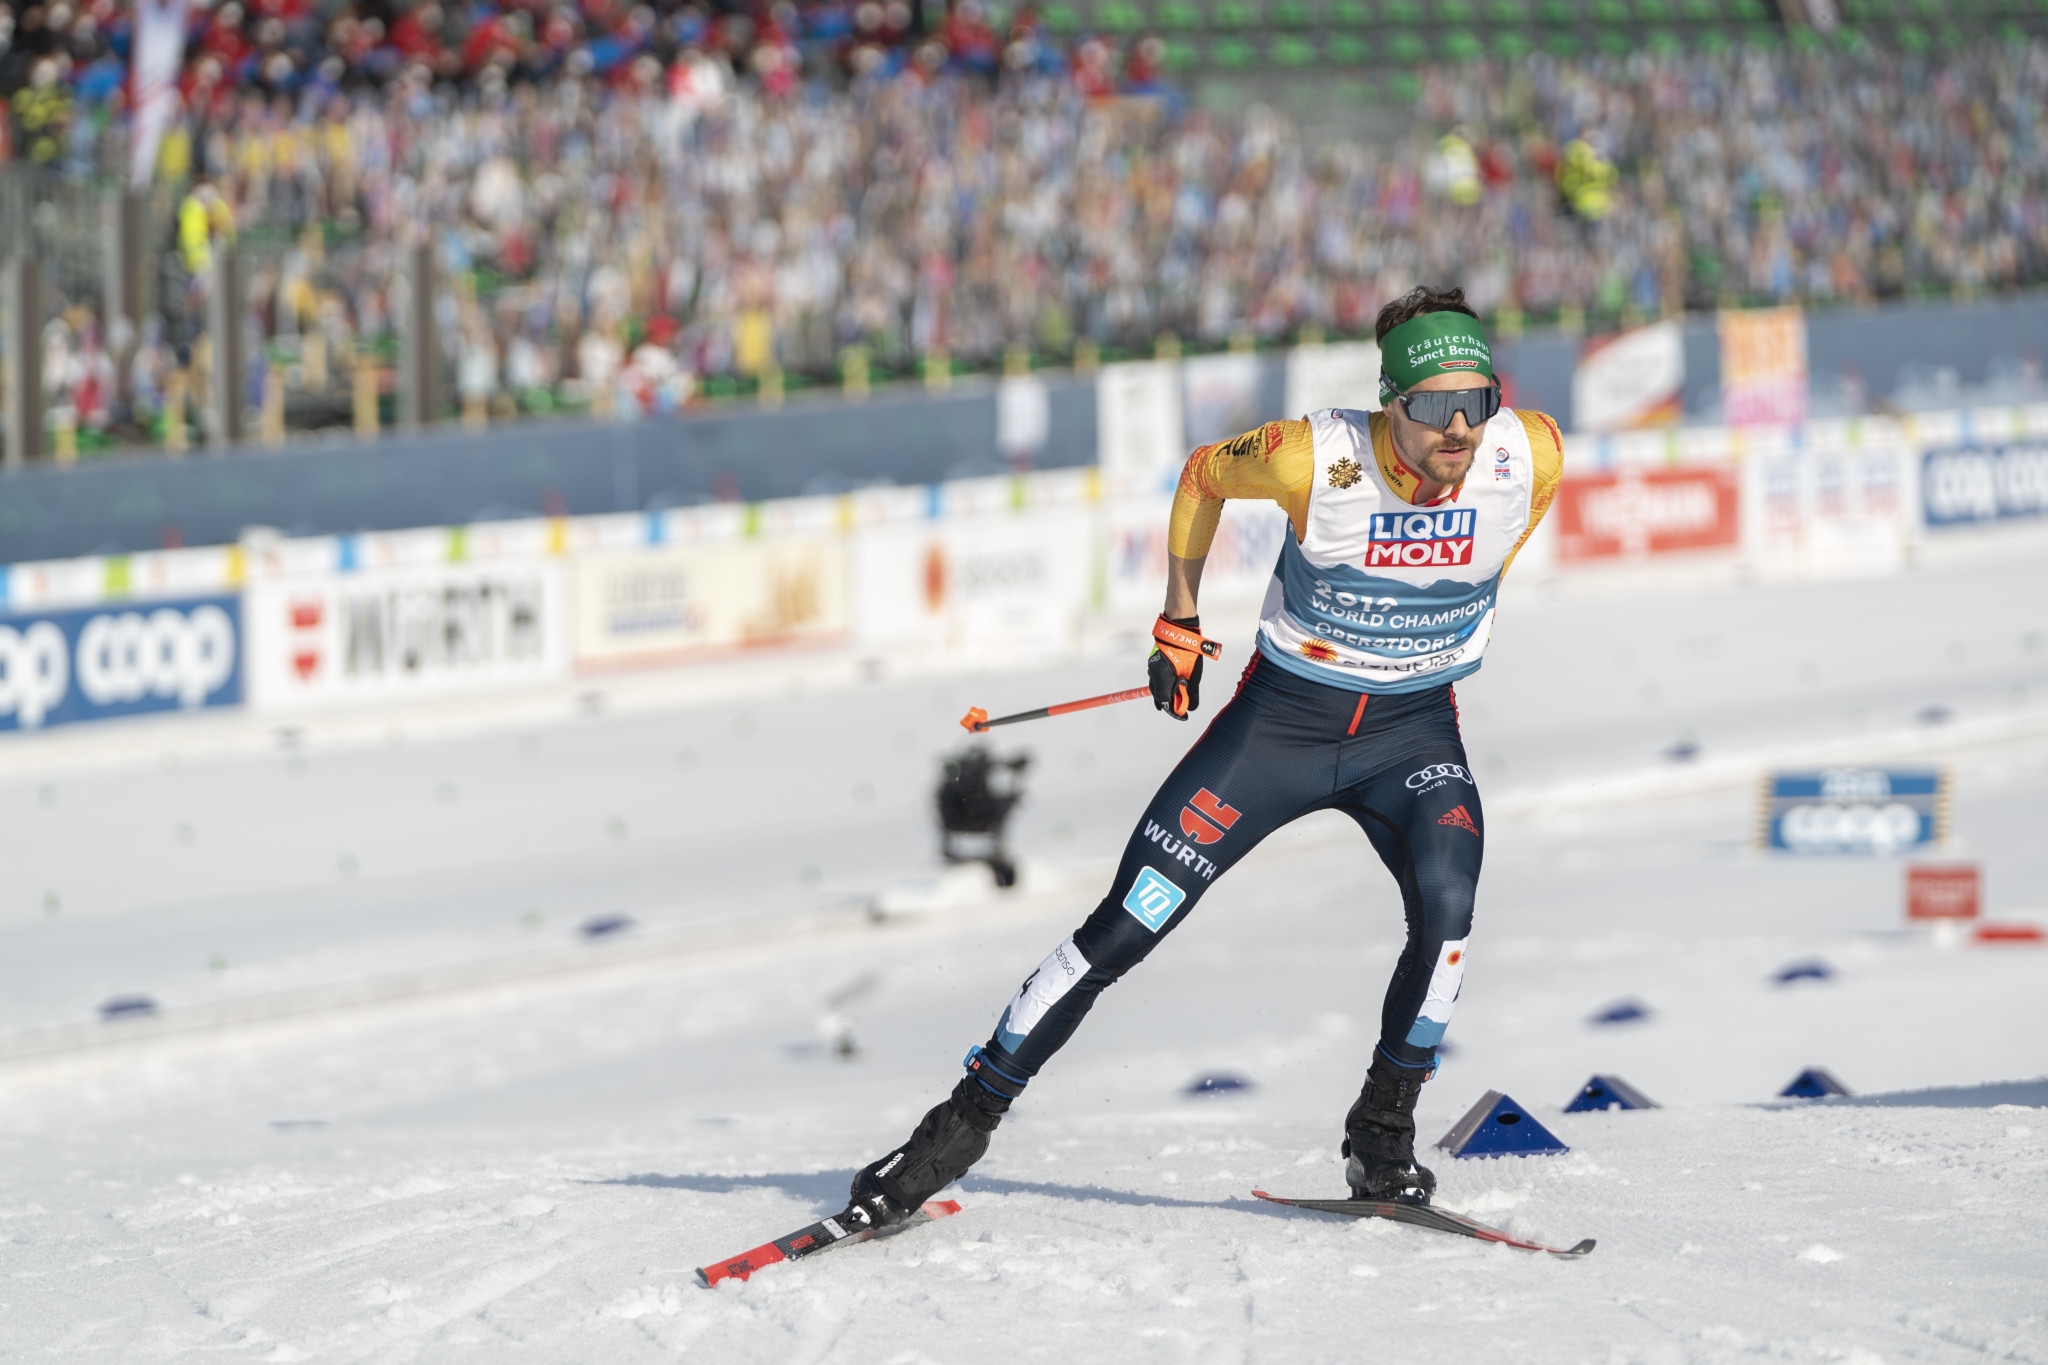 Fabian Rießle won men's Olympic team gold at Pyeonchang 2018 but has missed out on a place in the German team for Beijing 2022 ©Getty Images